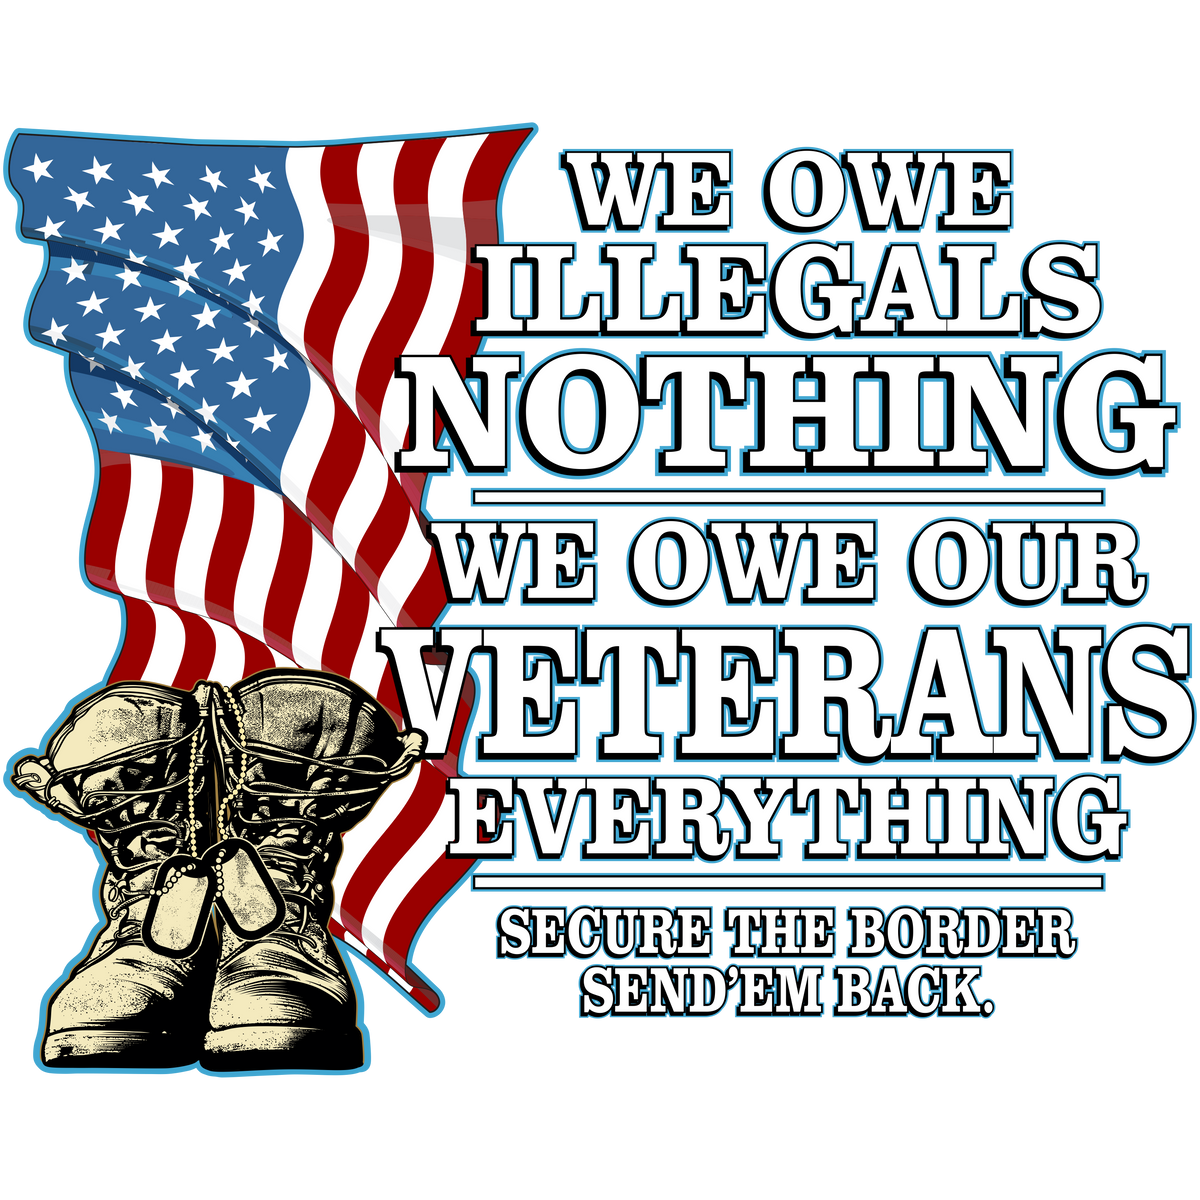 We Owe Illegals Nothing. We Owe Veterans Everything. PermaSticker. UV Inks. Free Shipping - Application Video In Description